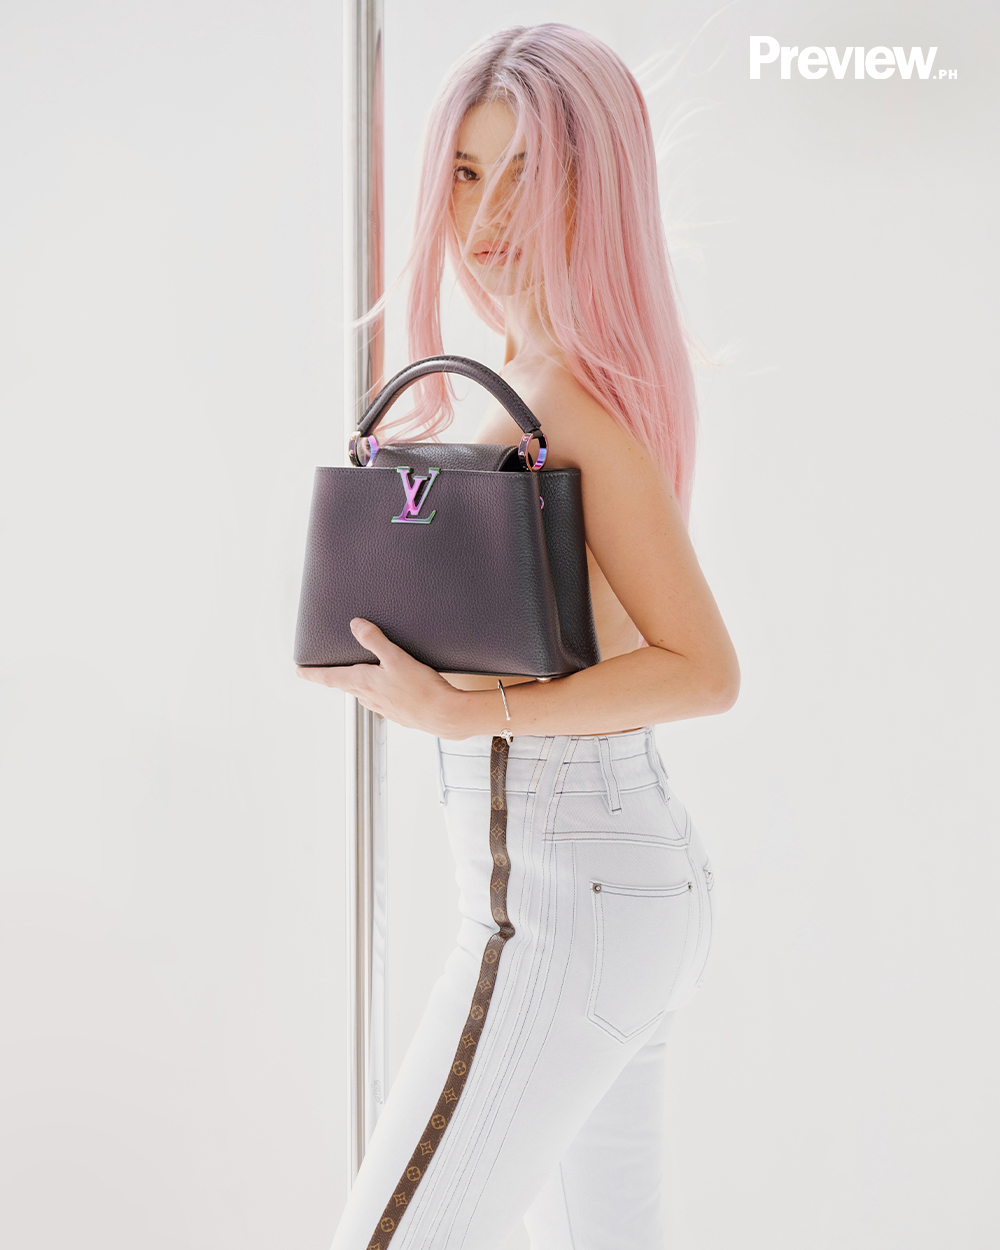 EXCLUSIVE: Anne Curtis Is Back With The Louis Vuitton S/S '21 Collection